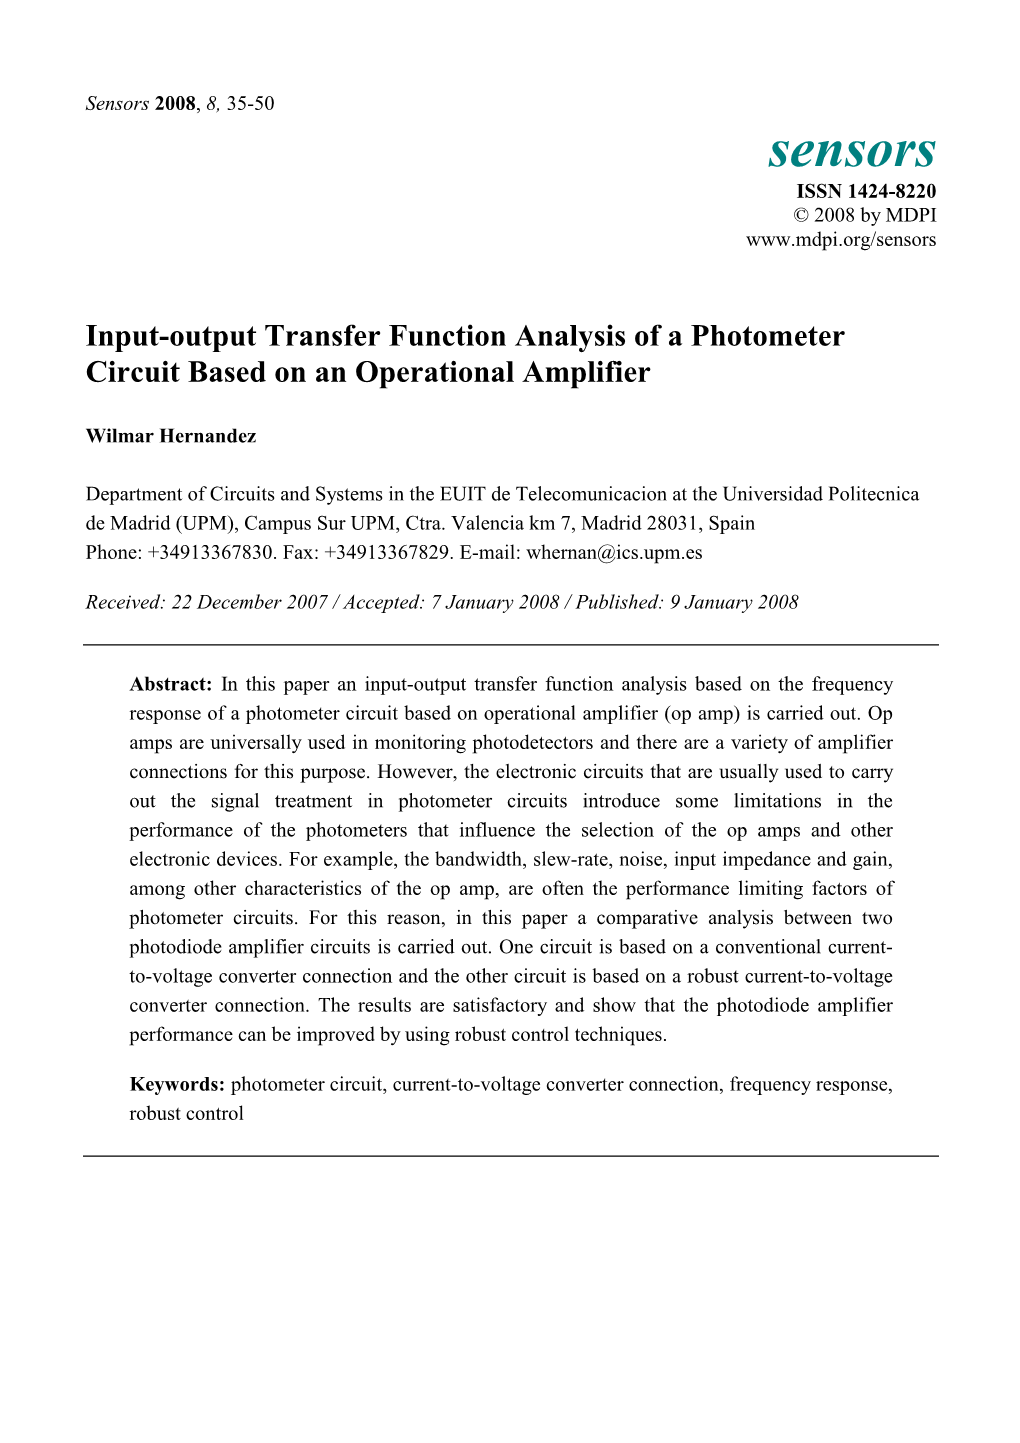 Input-Output Transfer Function Analysis of a Photometer Circuit Based on an Operational Amplifier